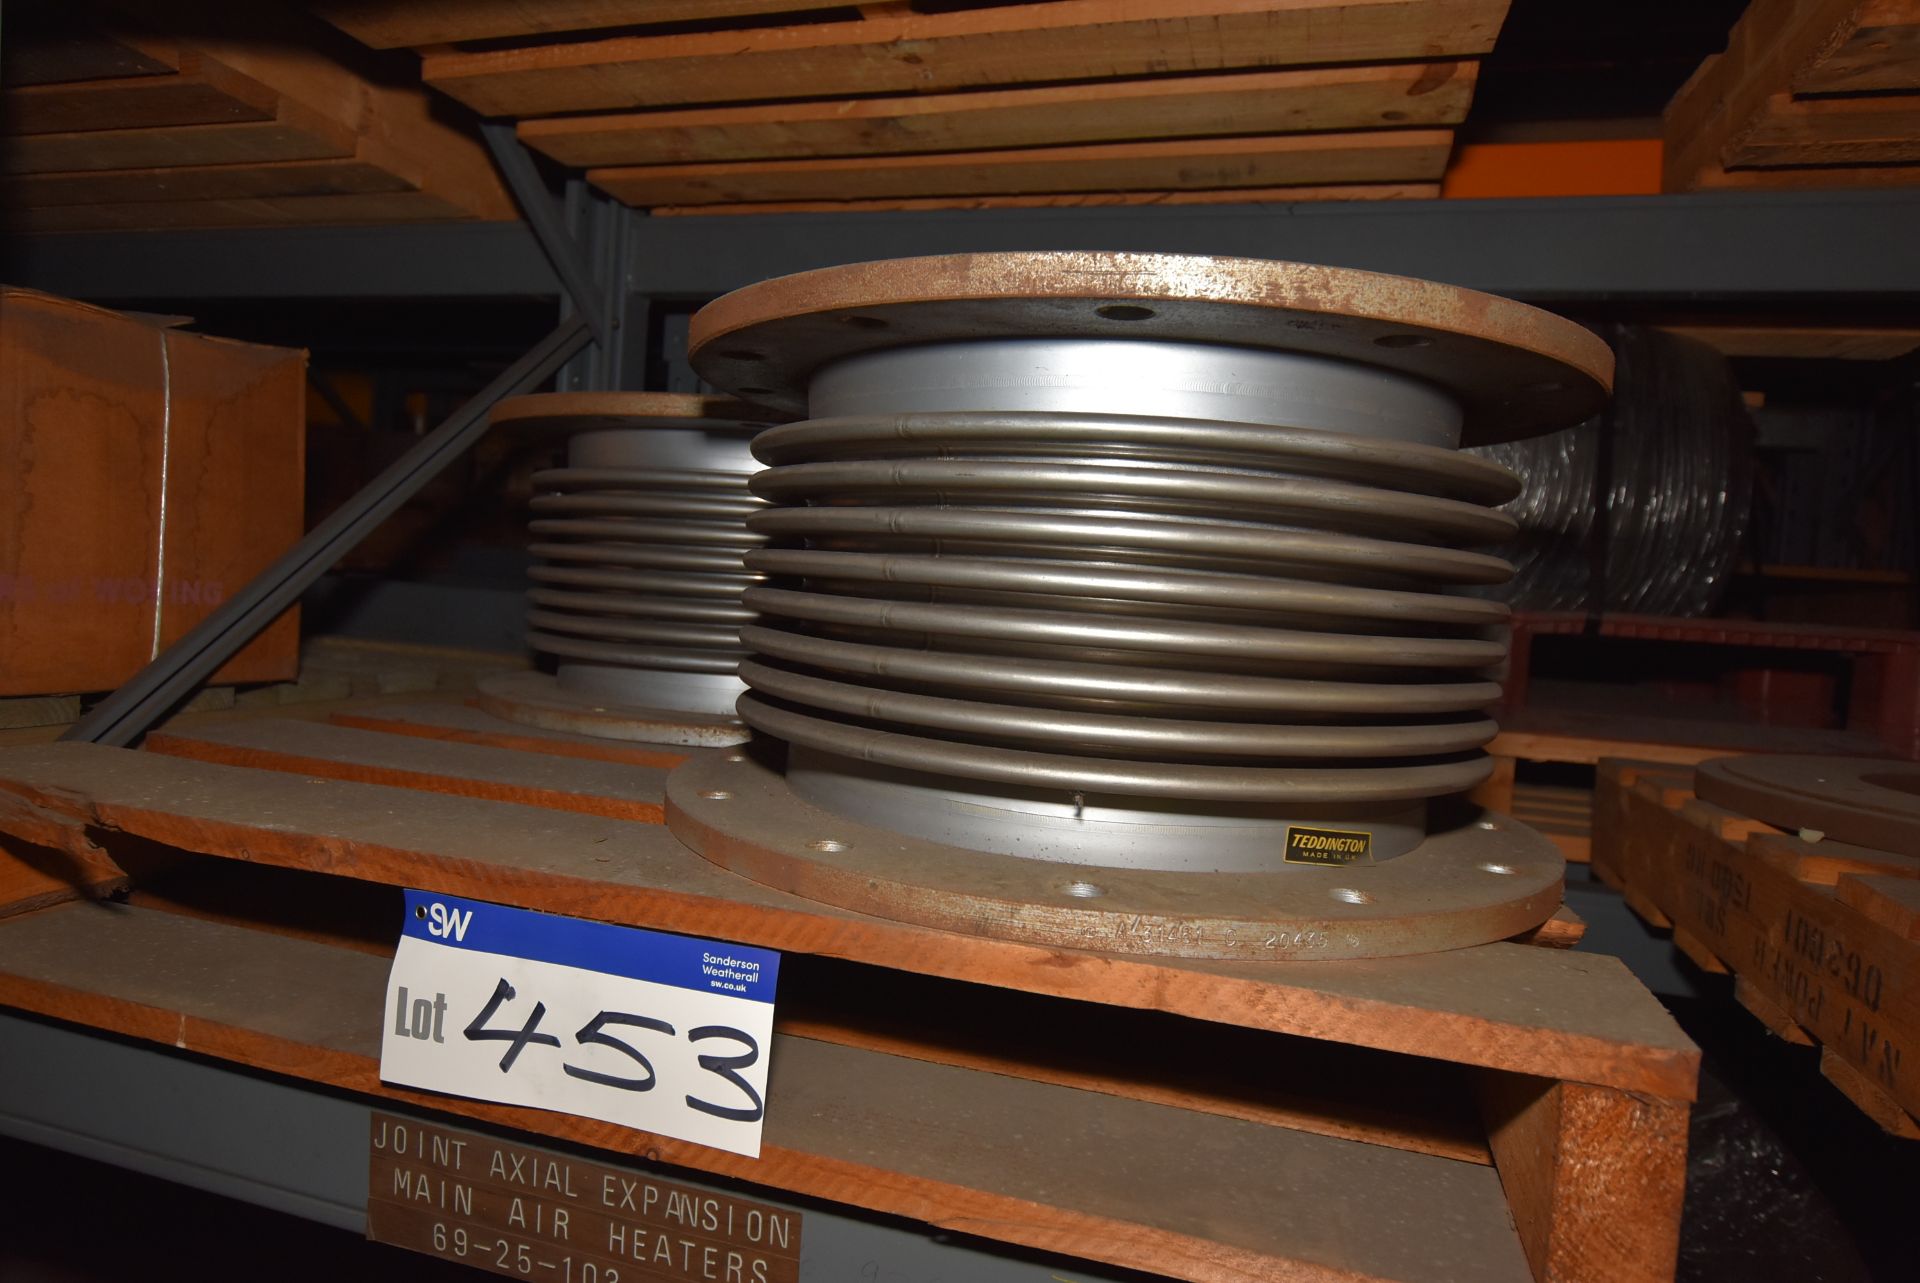 Two Teddington Joint Axial Expansion Units, main air heaters (69-25-103/ Bay 40) (please note this